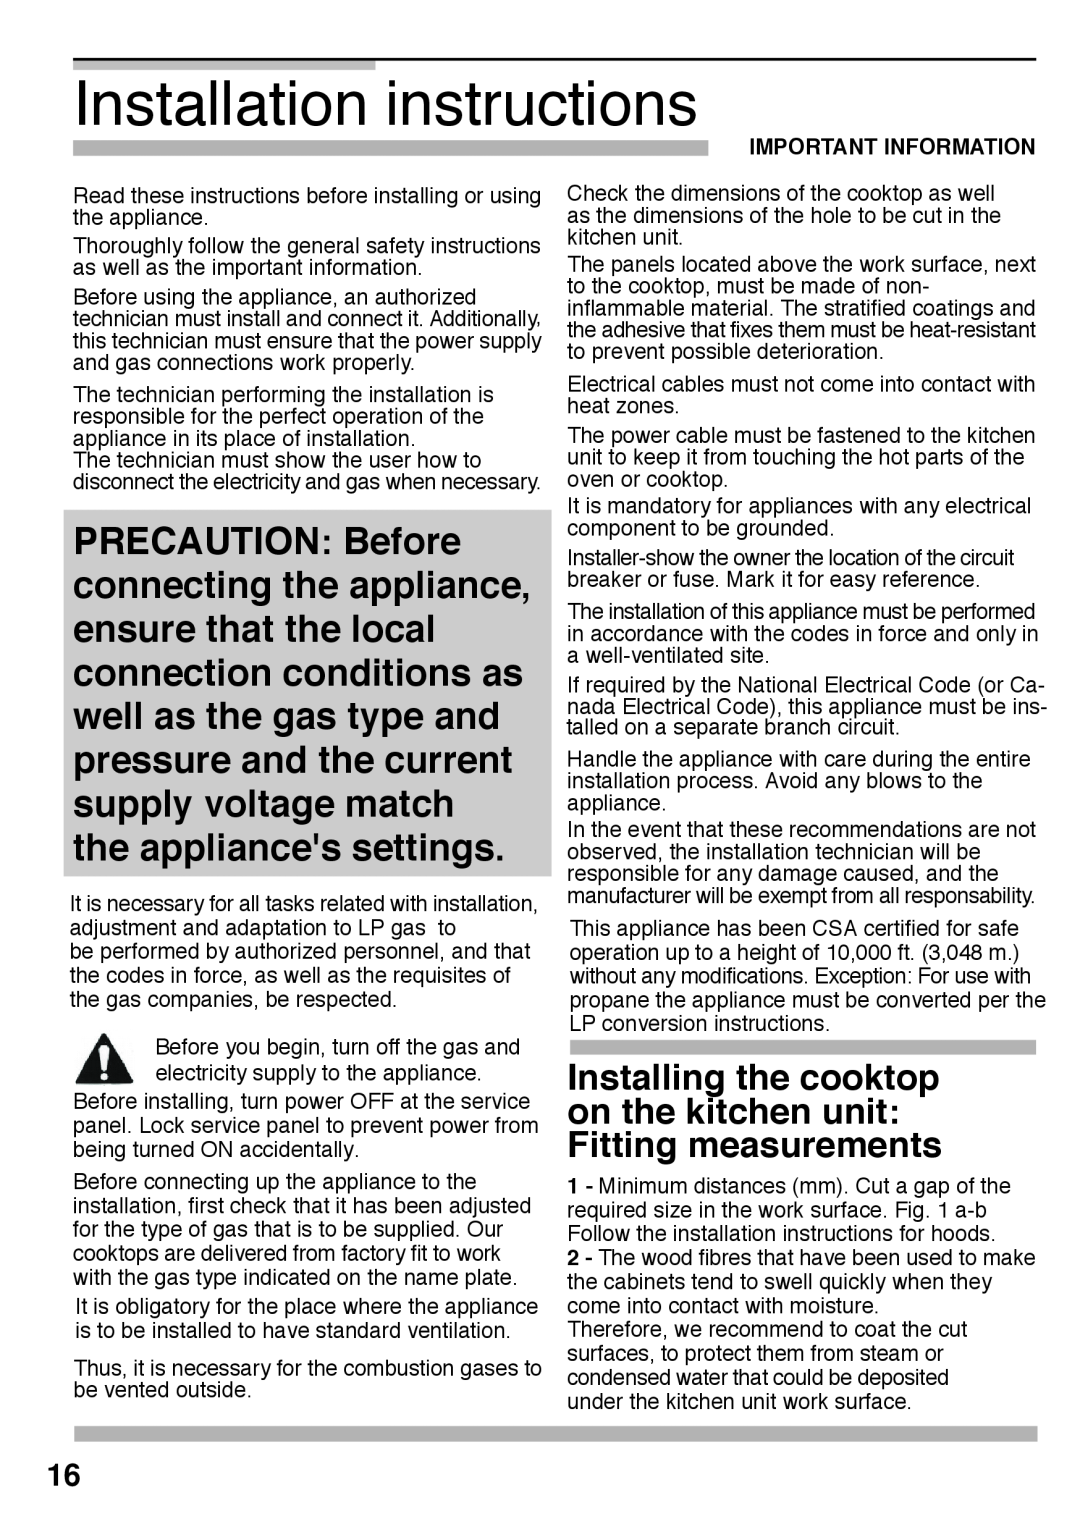 Bosch Appliances PCK755UC manual Installation instructions, Important Information 